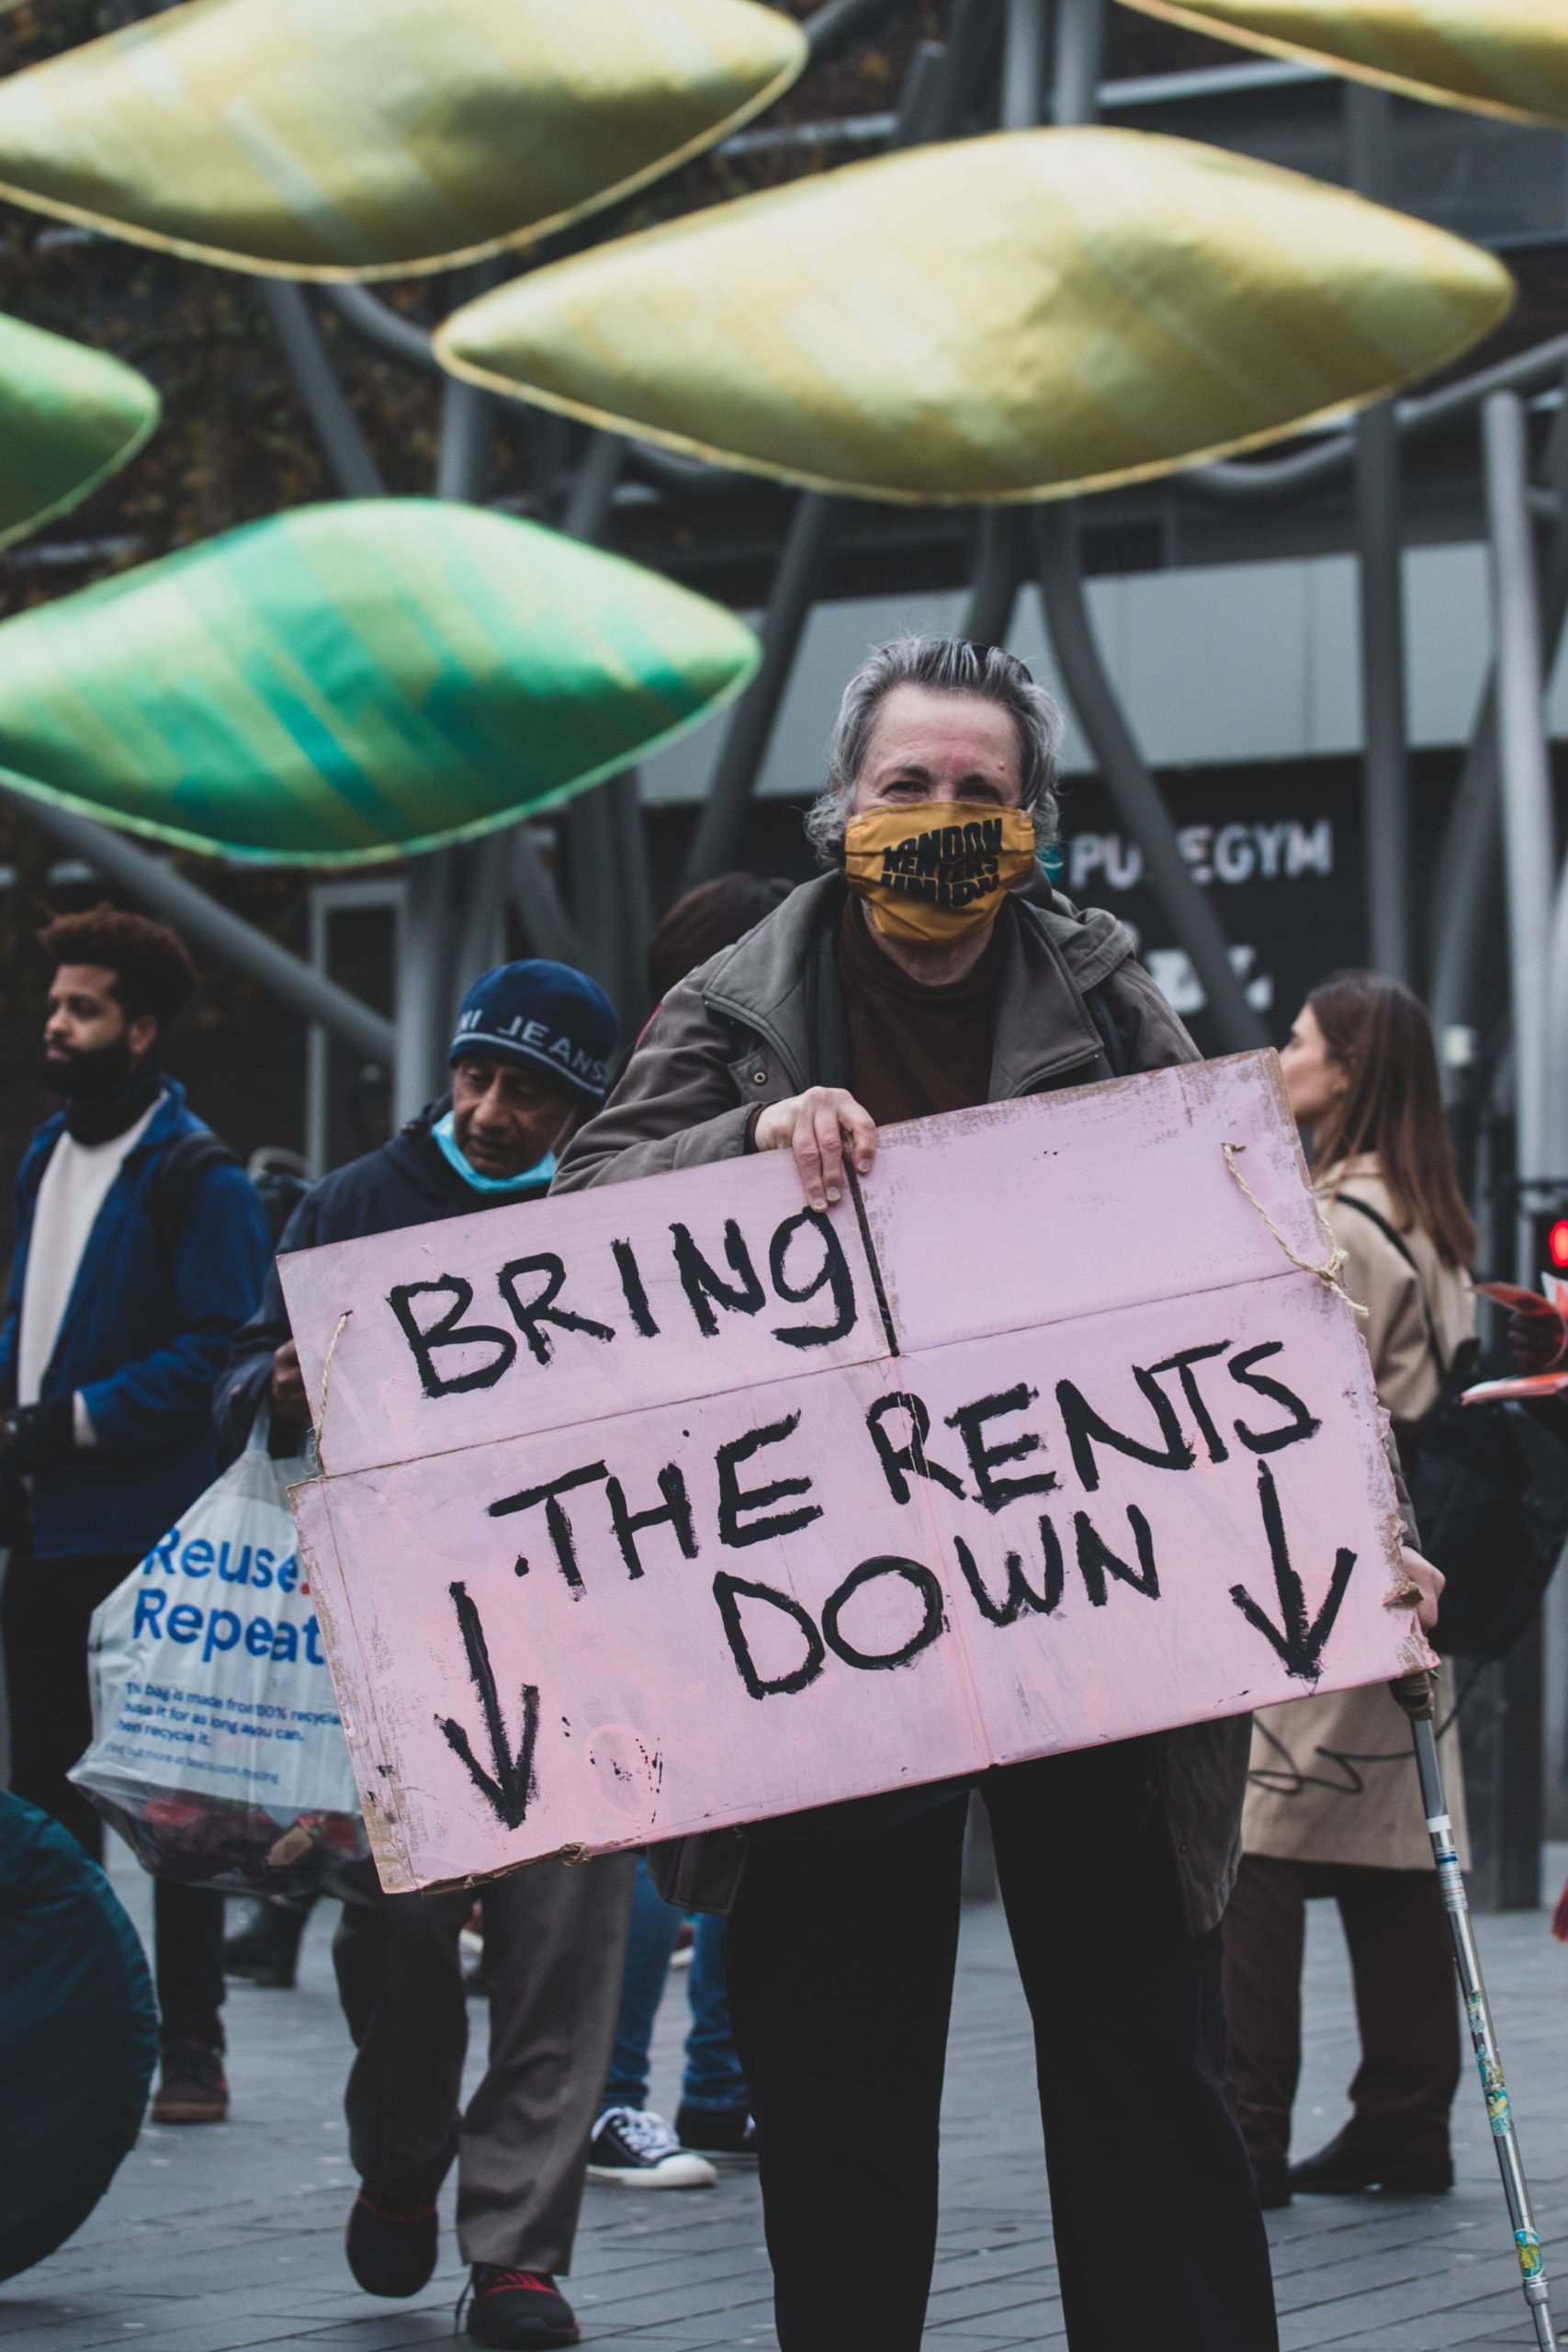 Man holding sign saying "bring the rents down" at a London protest